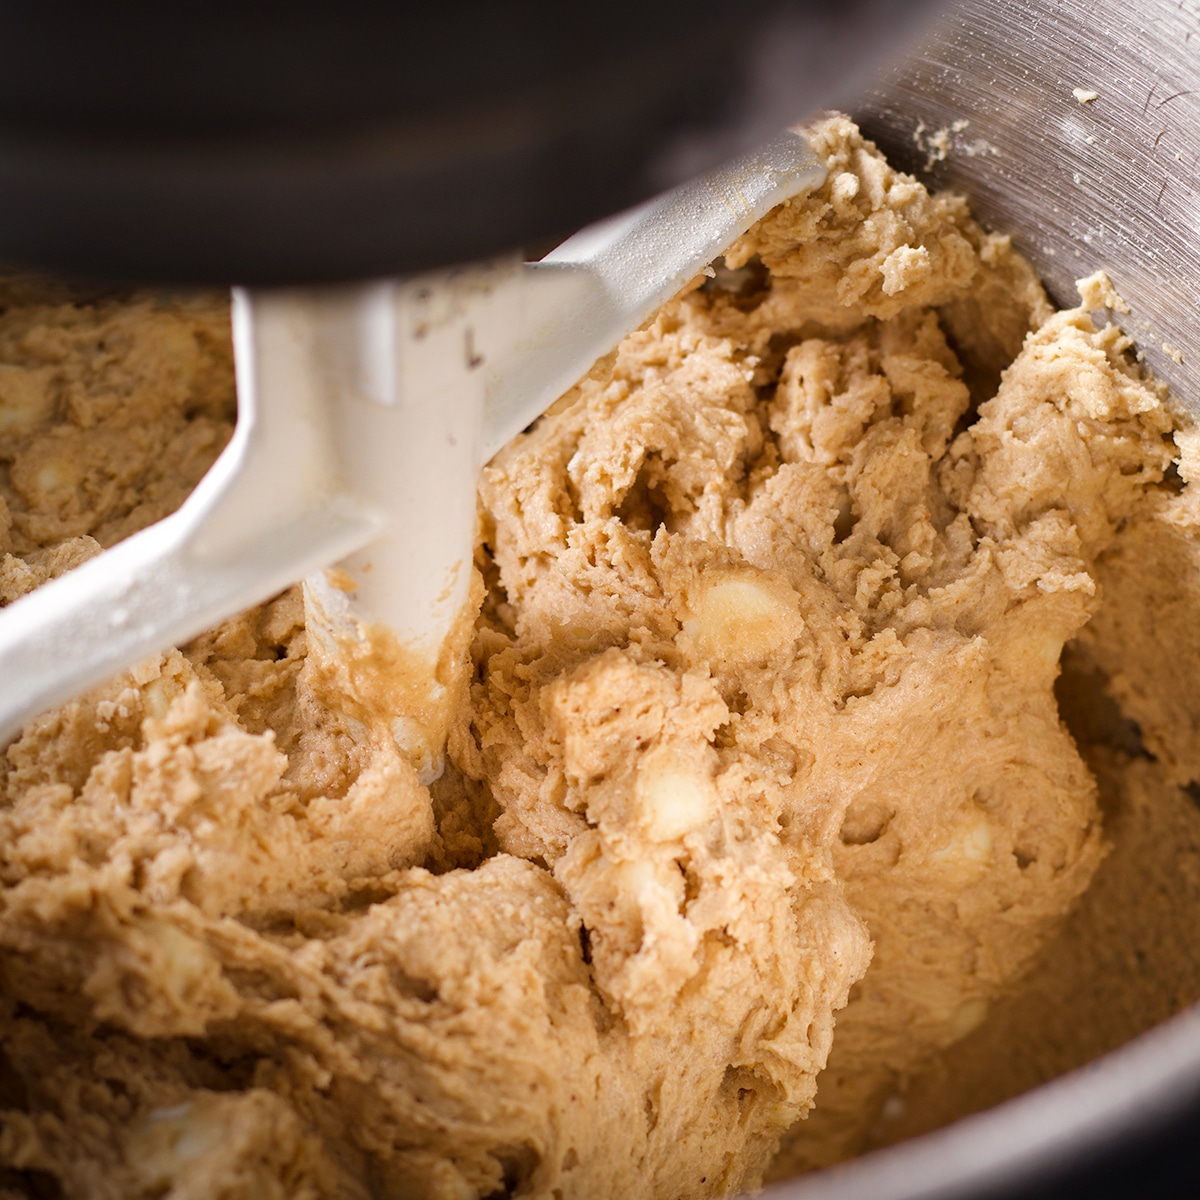 A stand mixer slowly mixing white chocolate chips into cookie dough.